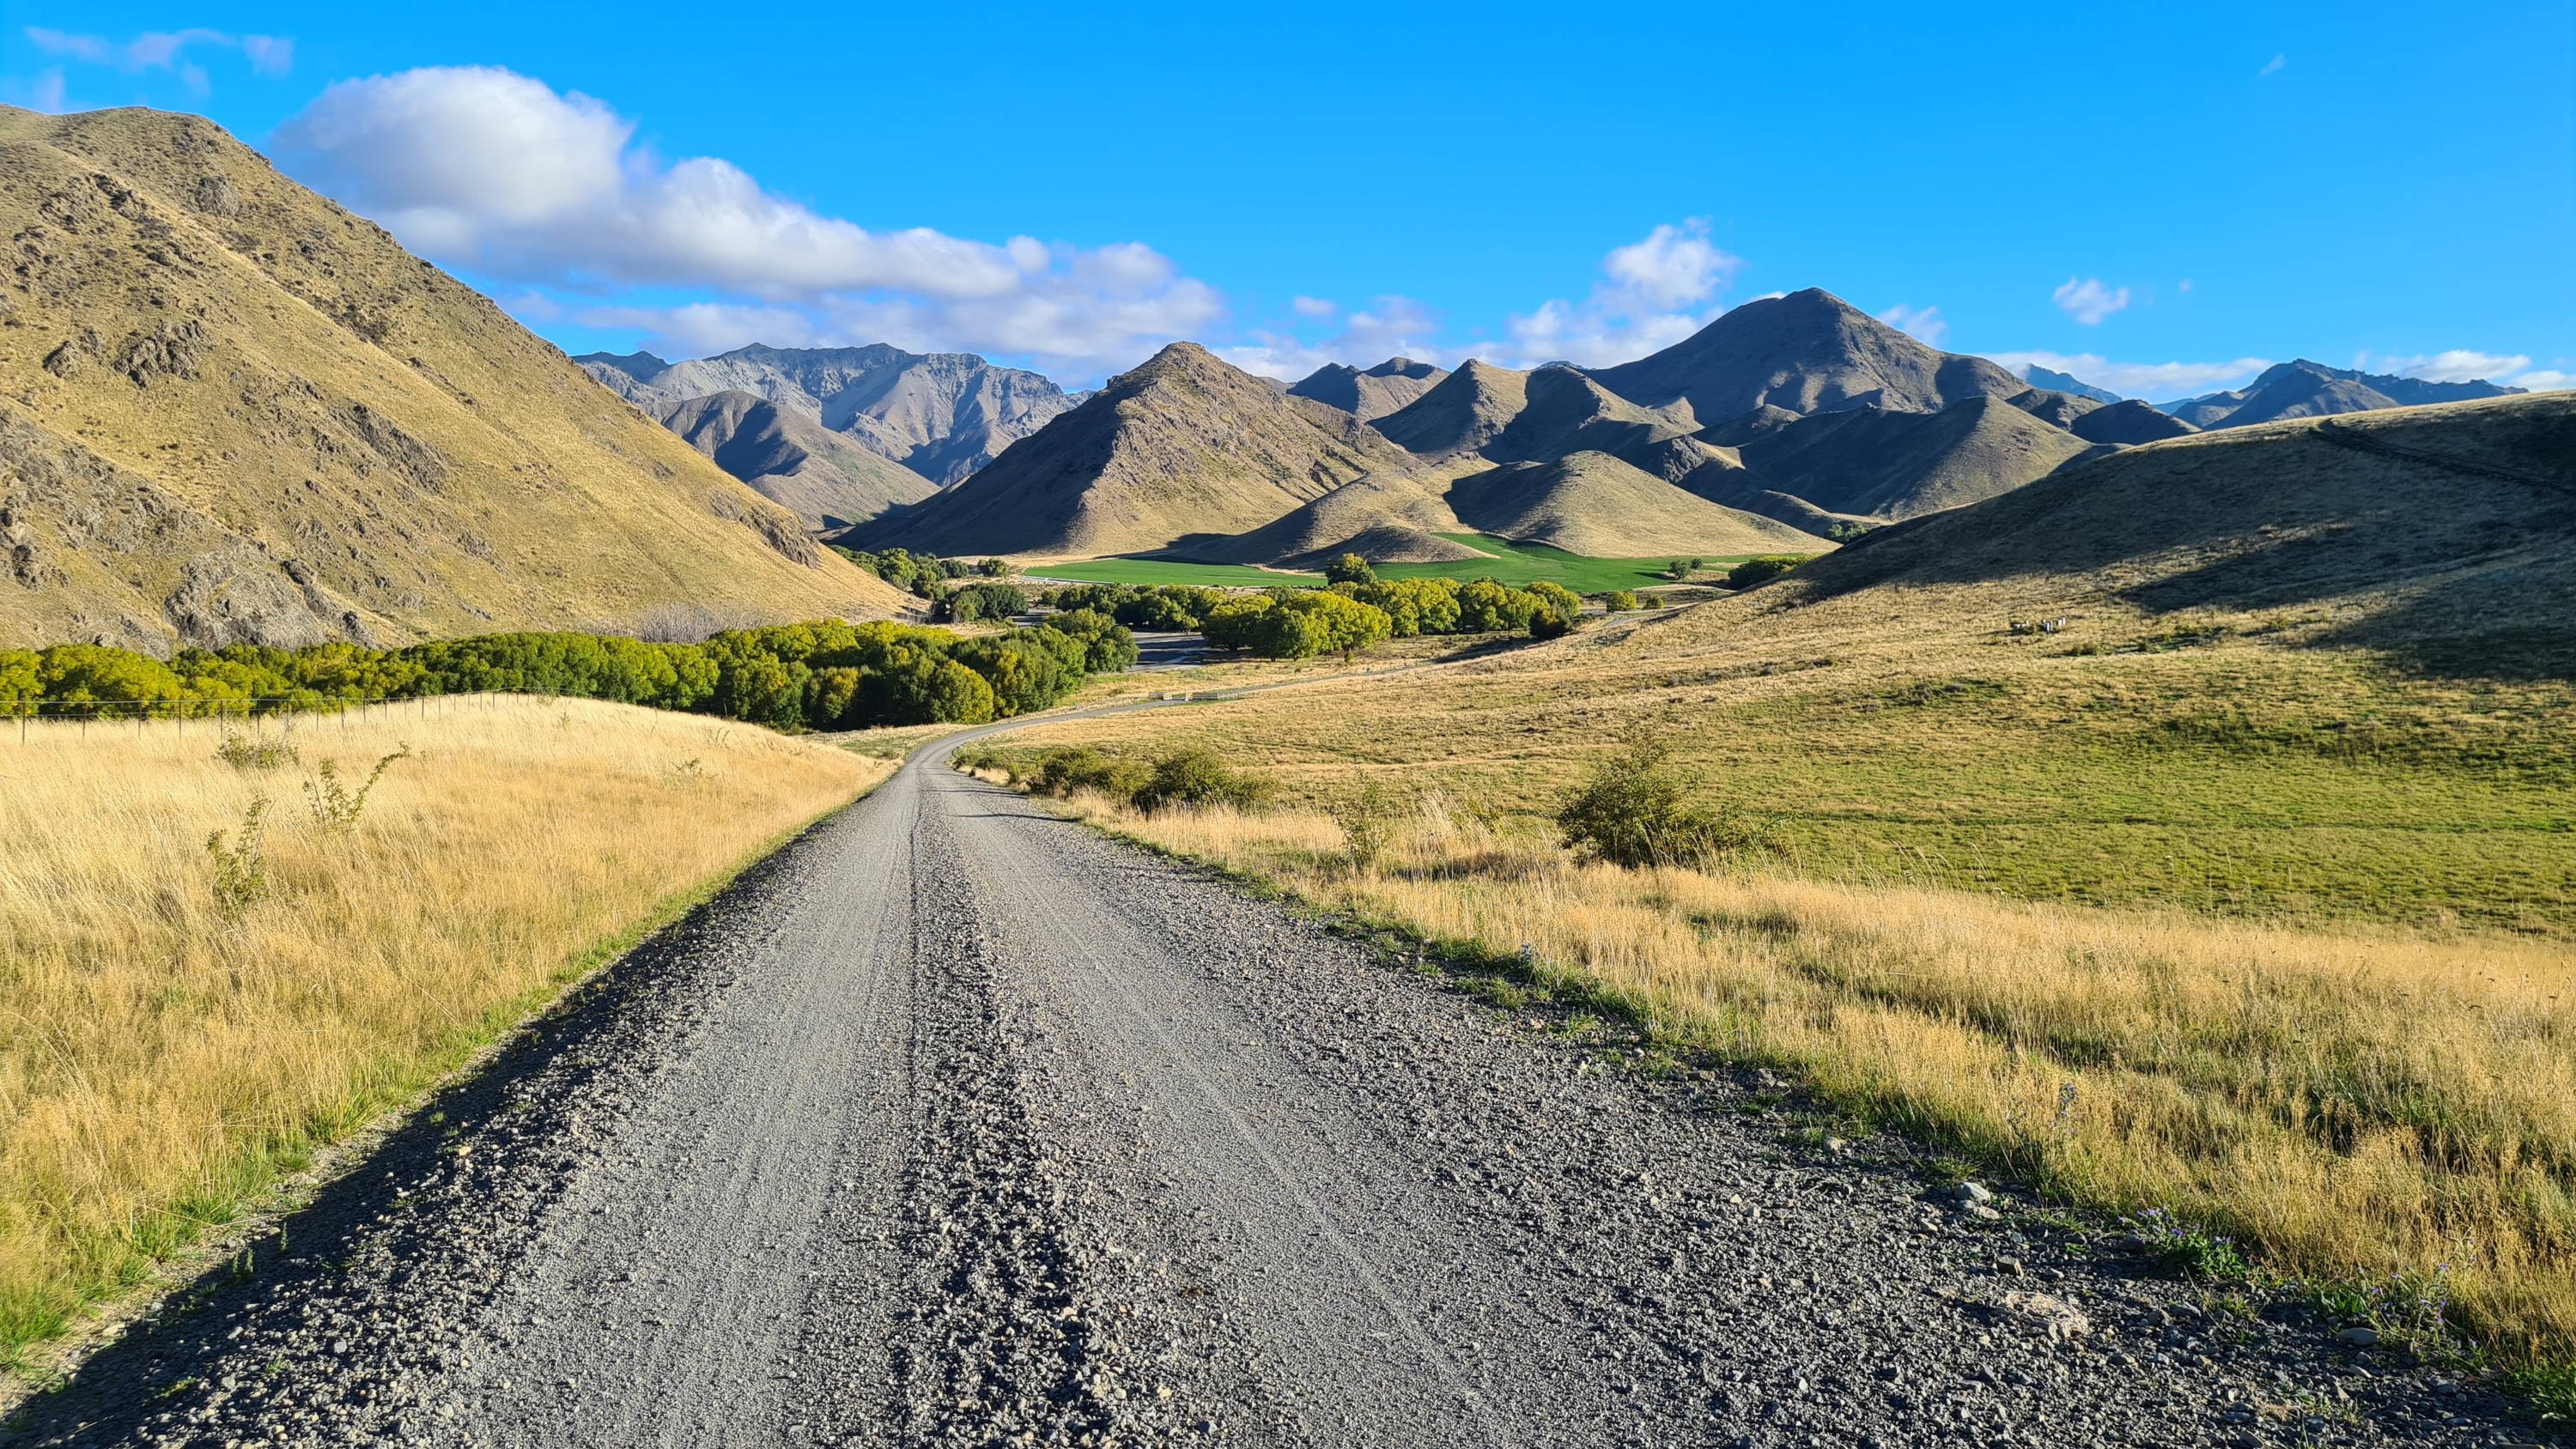 A long stretch of dark gravel road winds towards a mountain range on the horizon.